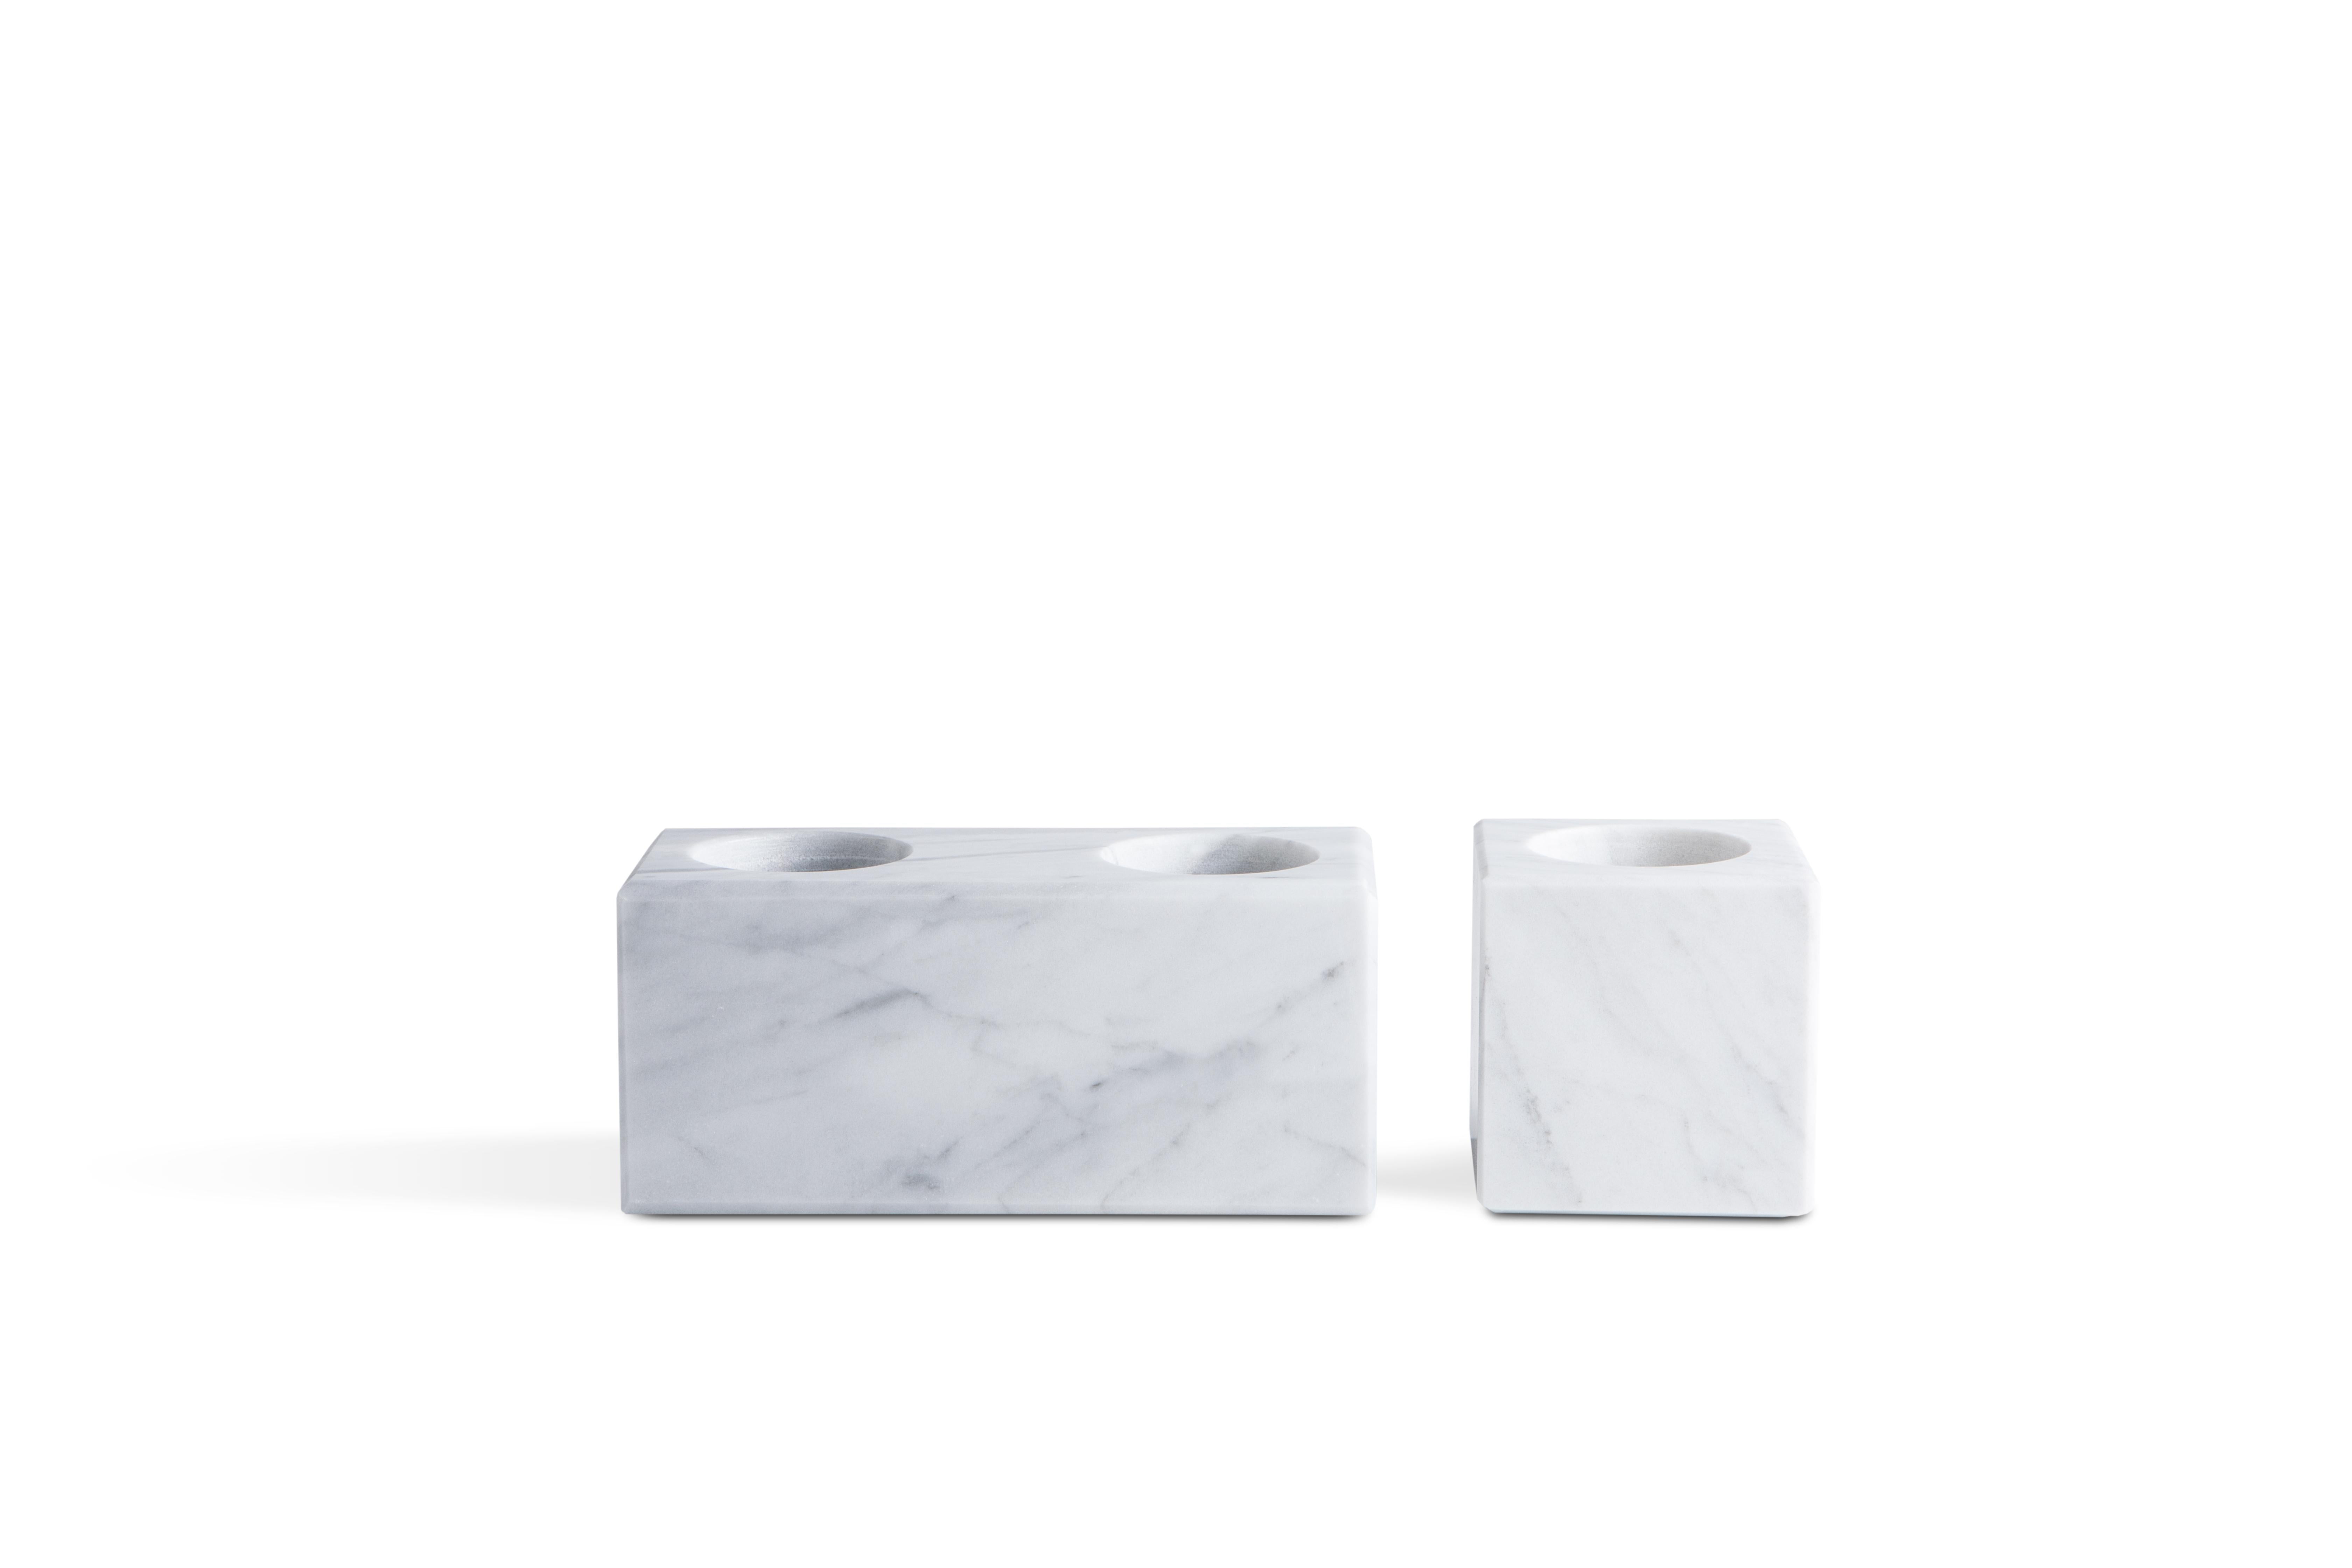 Squared single candleholder in white Carrara marble. 

Each piece is in a way unique (since each marble block is different in veins and shades) and handcrafted in Italy. Slight variations in shape, color and size are to be considered a guarantee